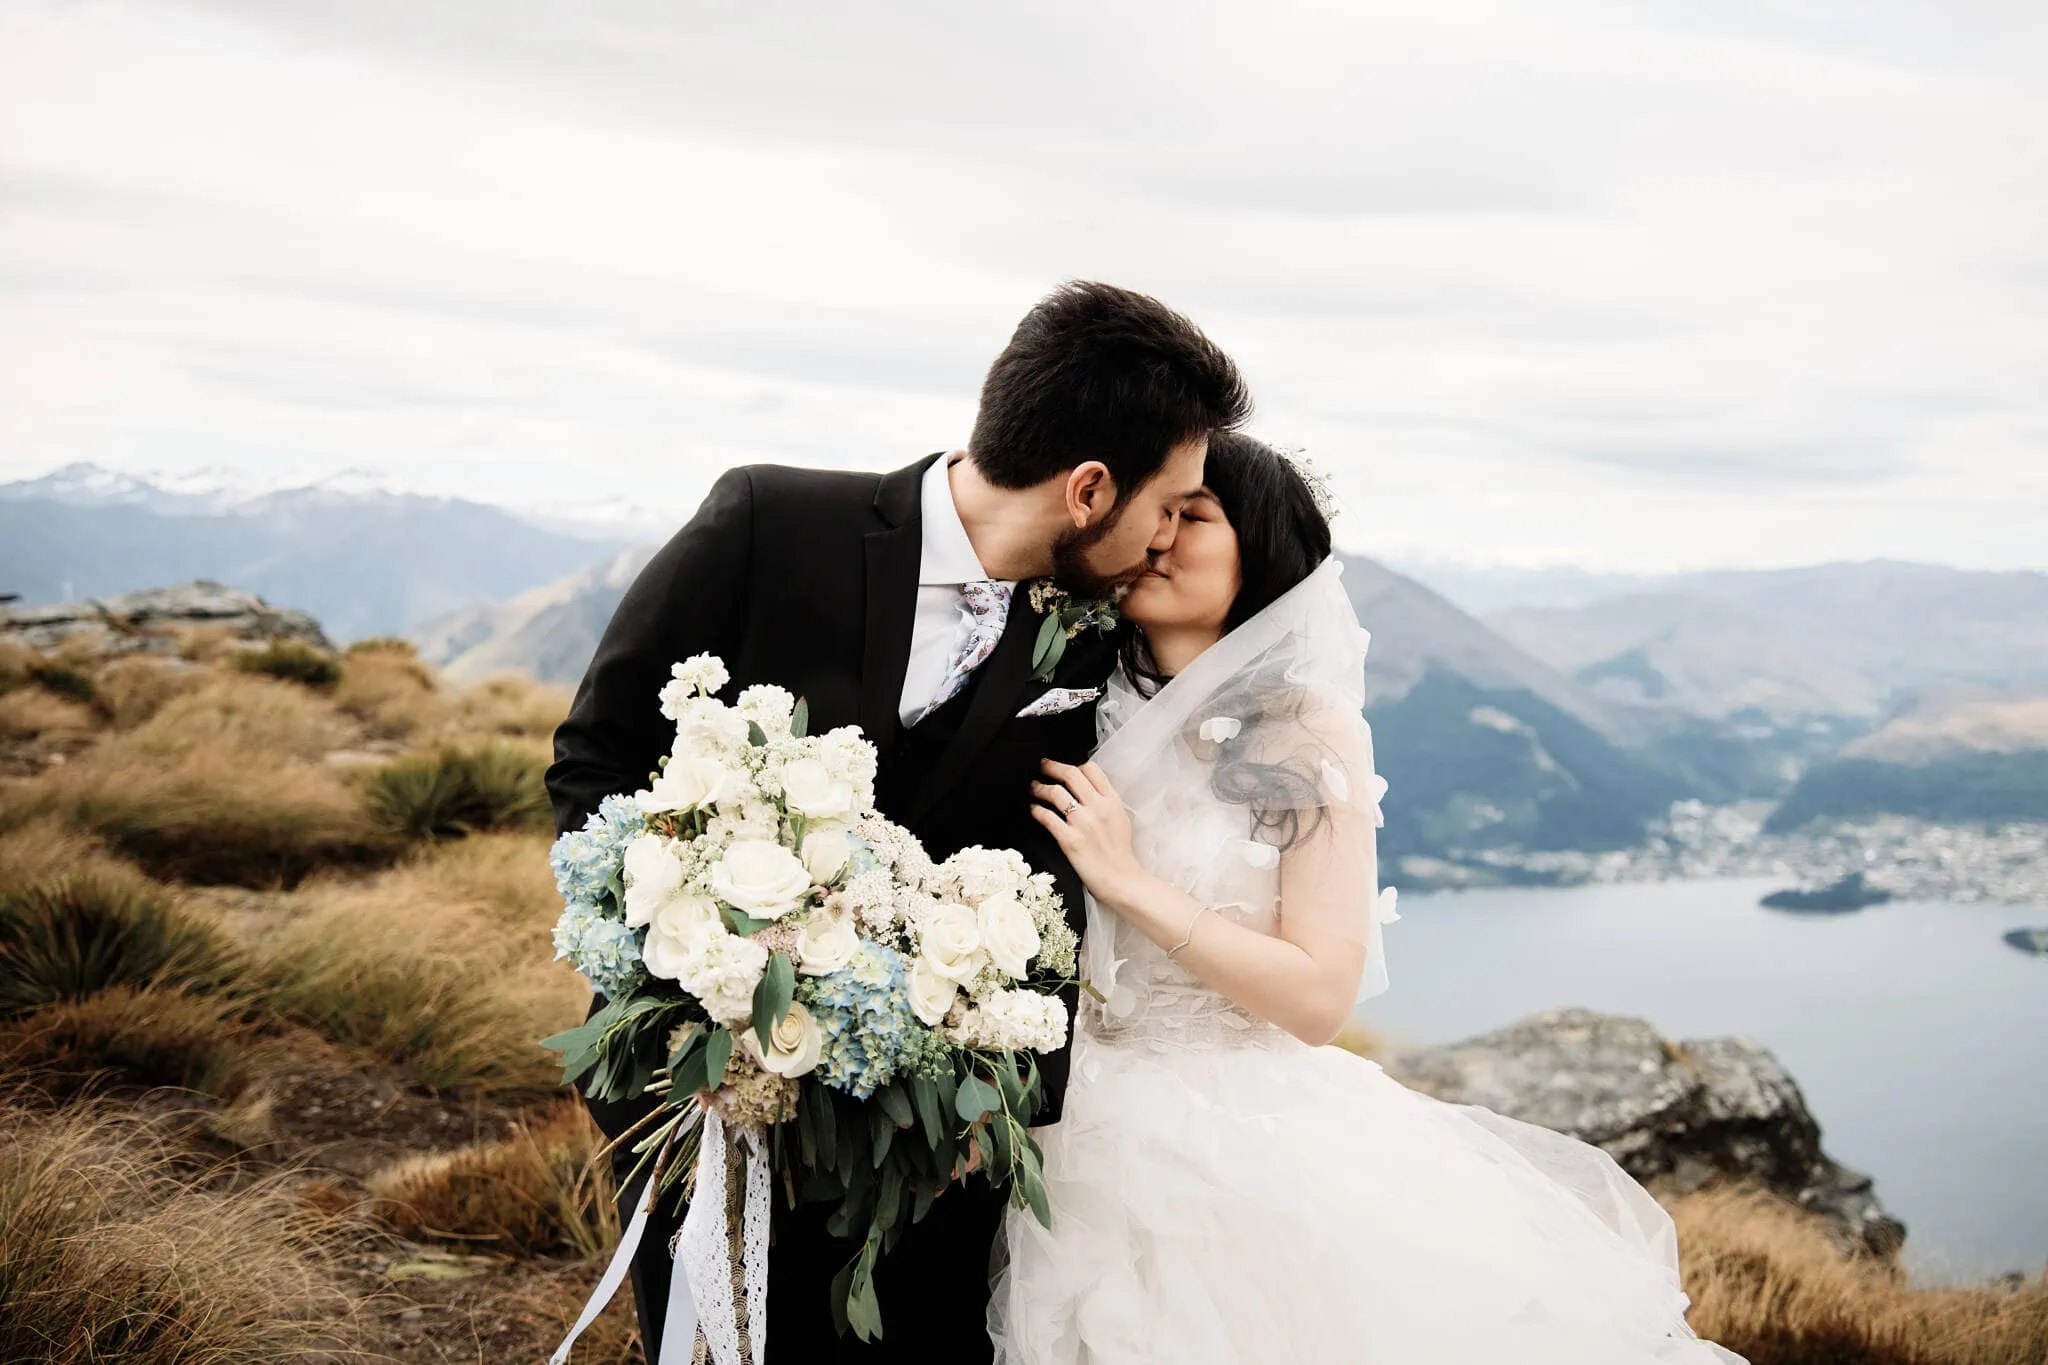 Carlos and Wanzhu's intimate Cecil Peak heli elopement wedding with a mountain backdrop in Queenstown, New Zealand.